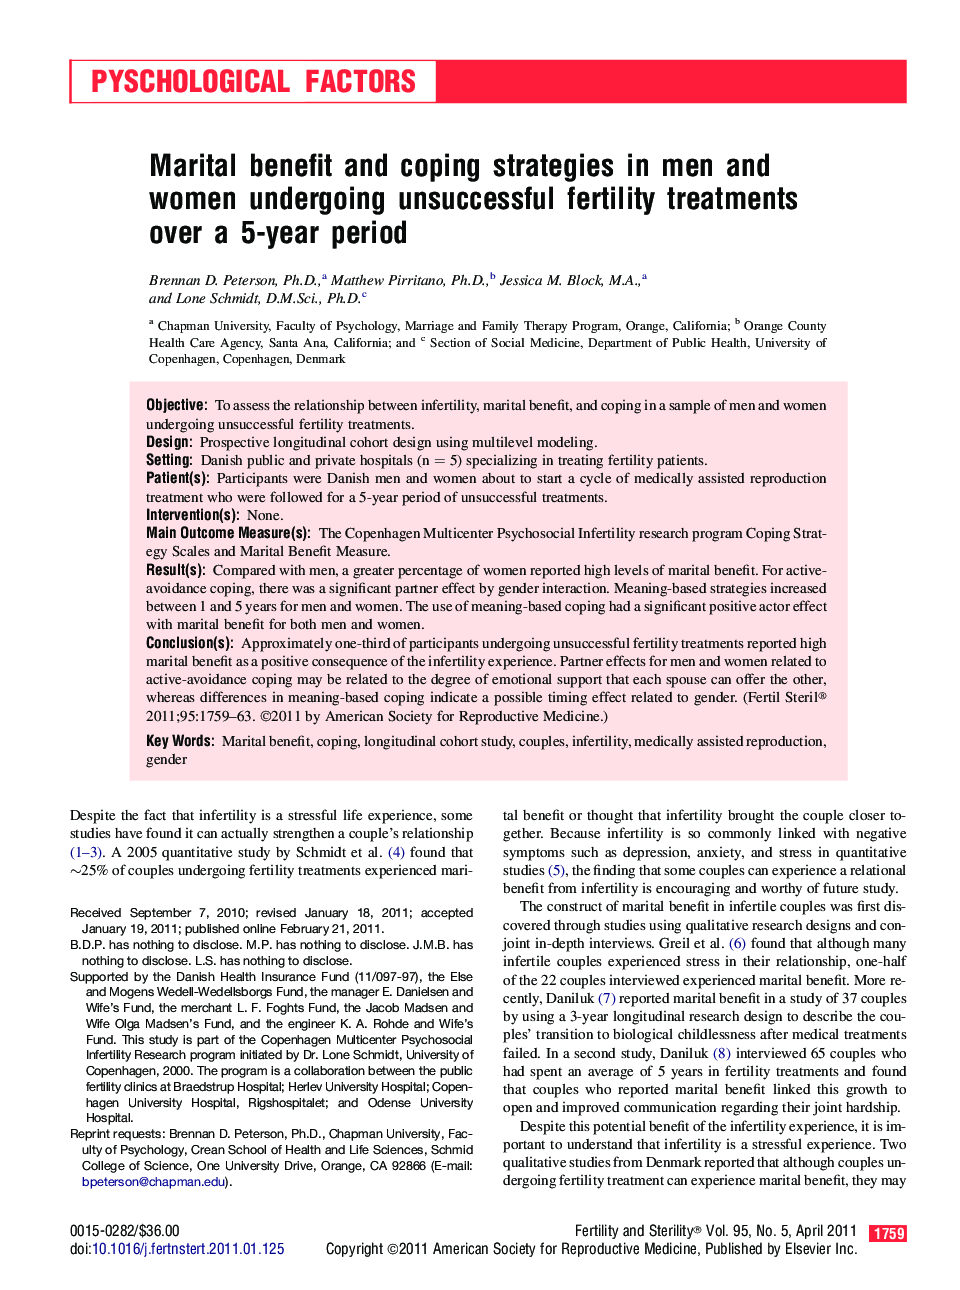 Marital benefit and coping strategies in men and women undergoing unsuccessful fertility treatments over a 5-year period